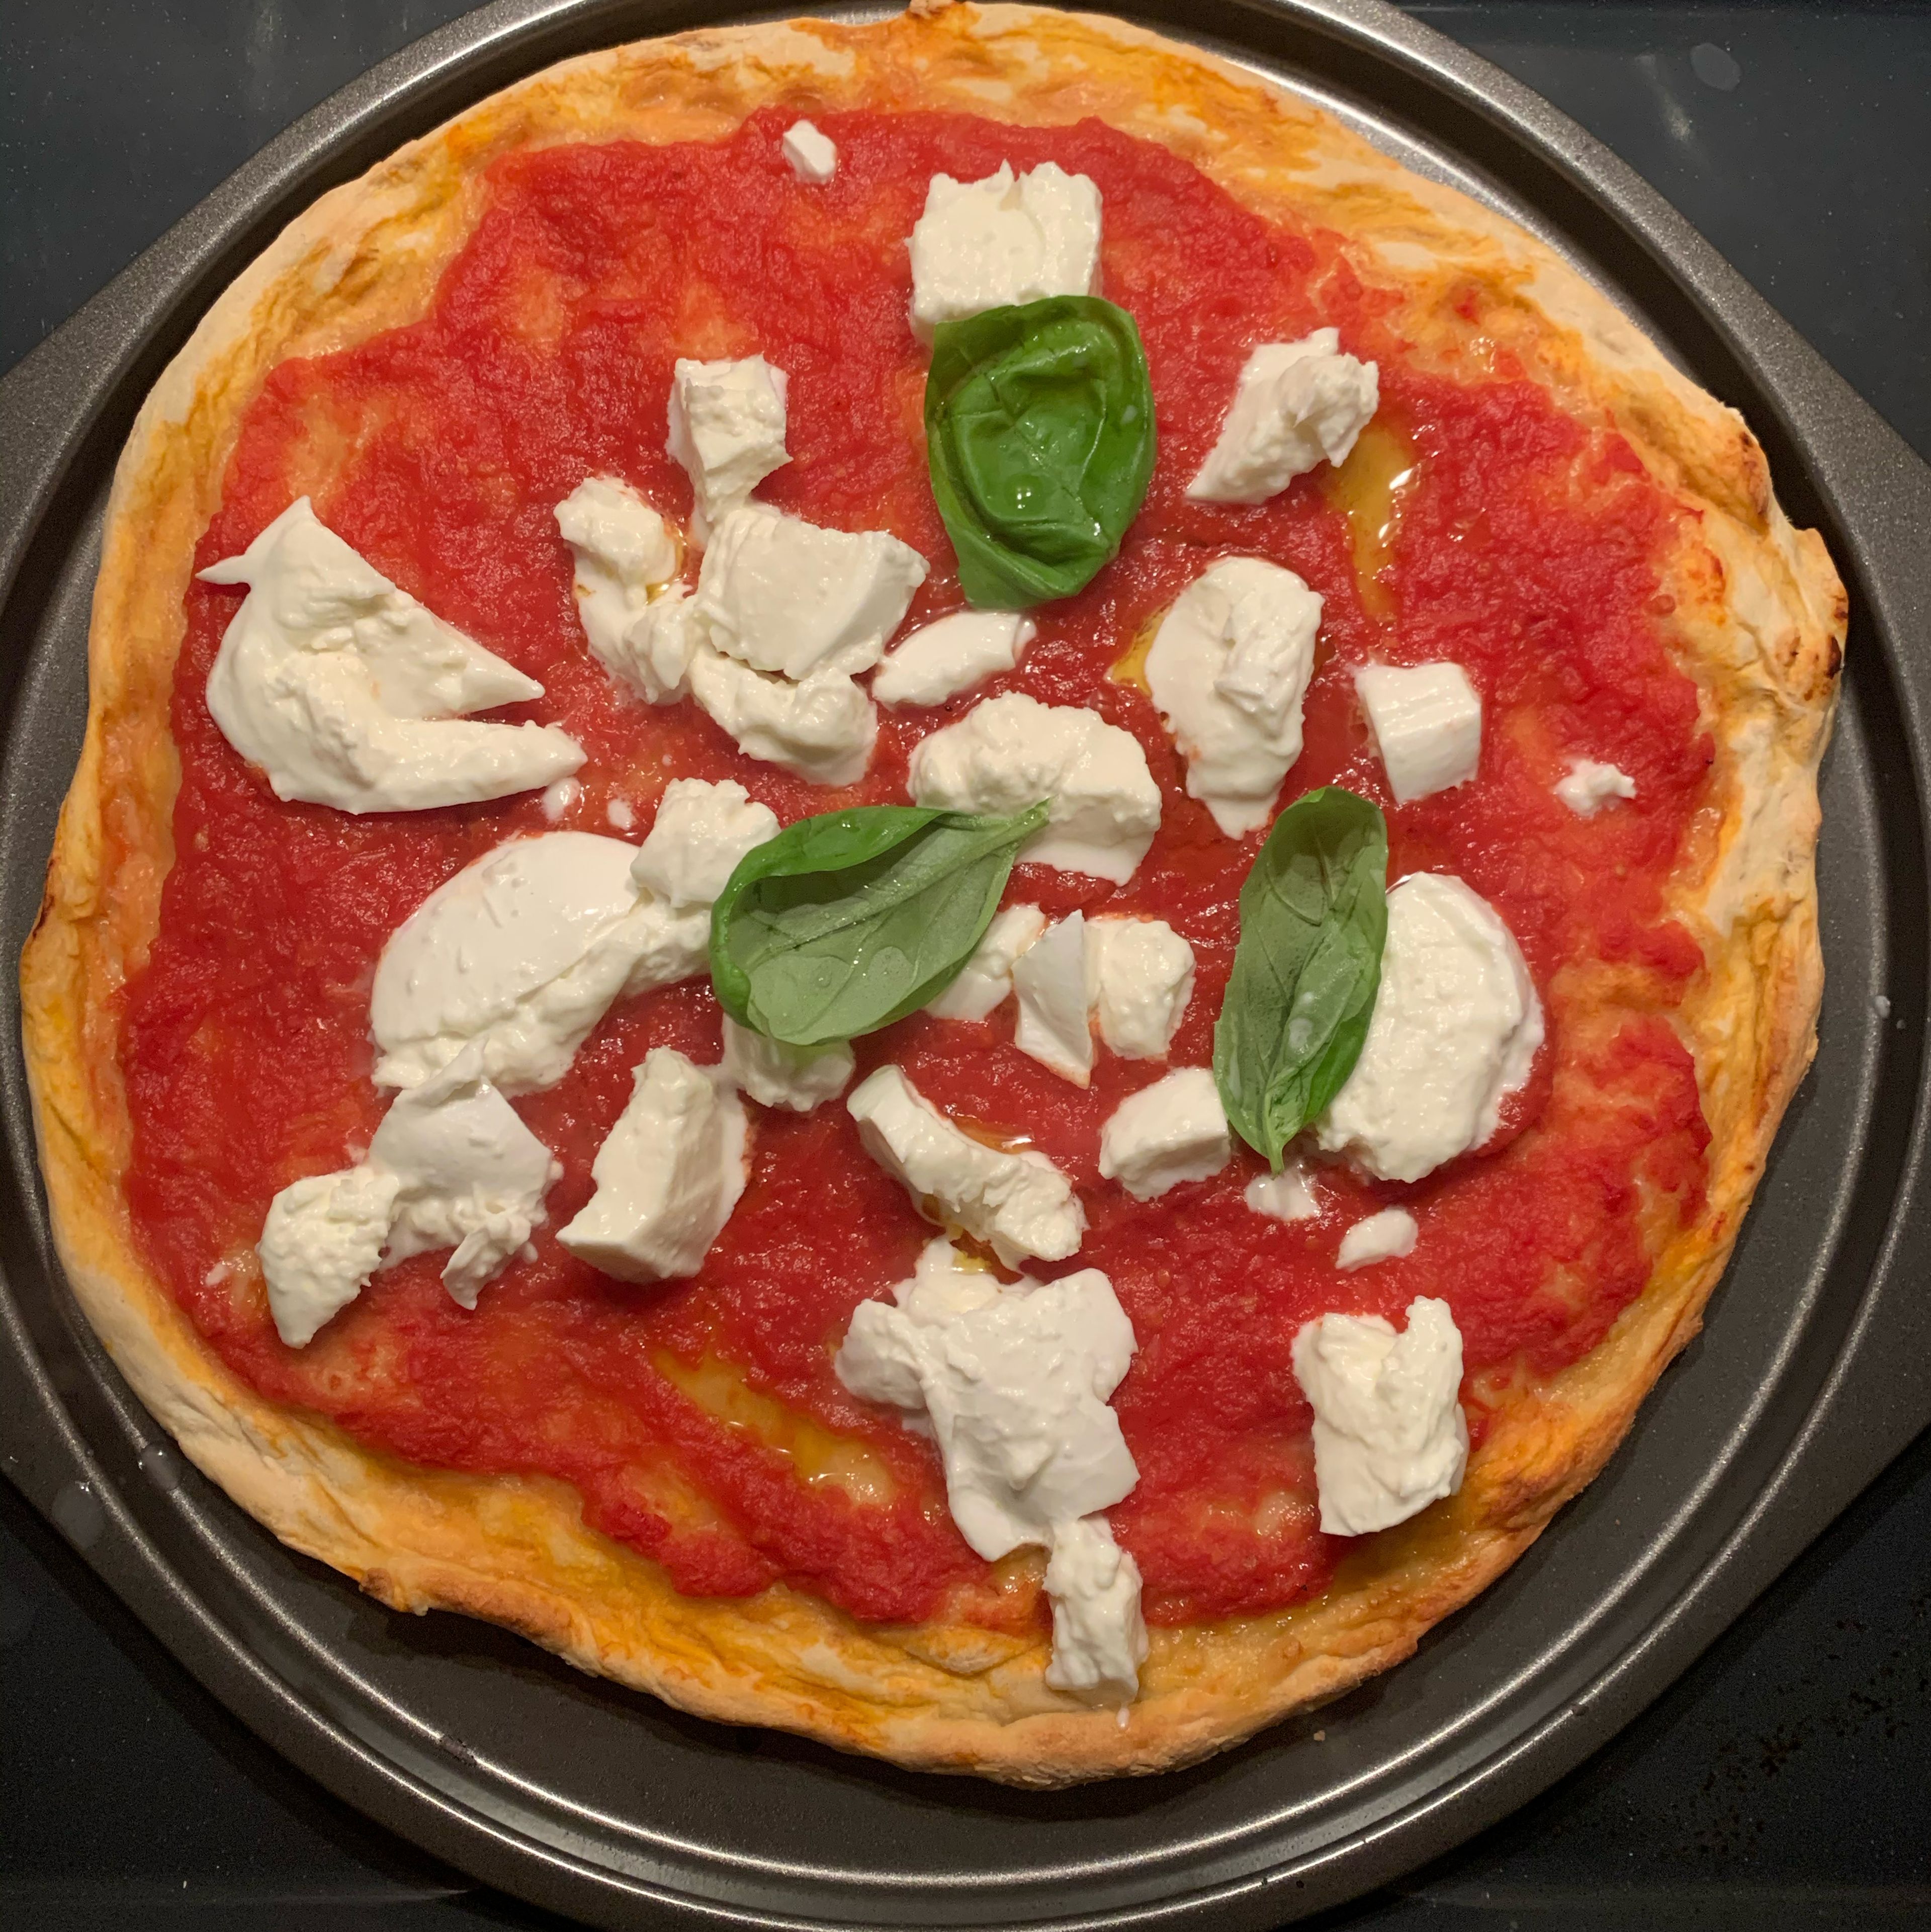 Add the sliced mozzarella cheese and a few basil leaves. Bake for 5 minutes until the mozzarella is fully cooked.